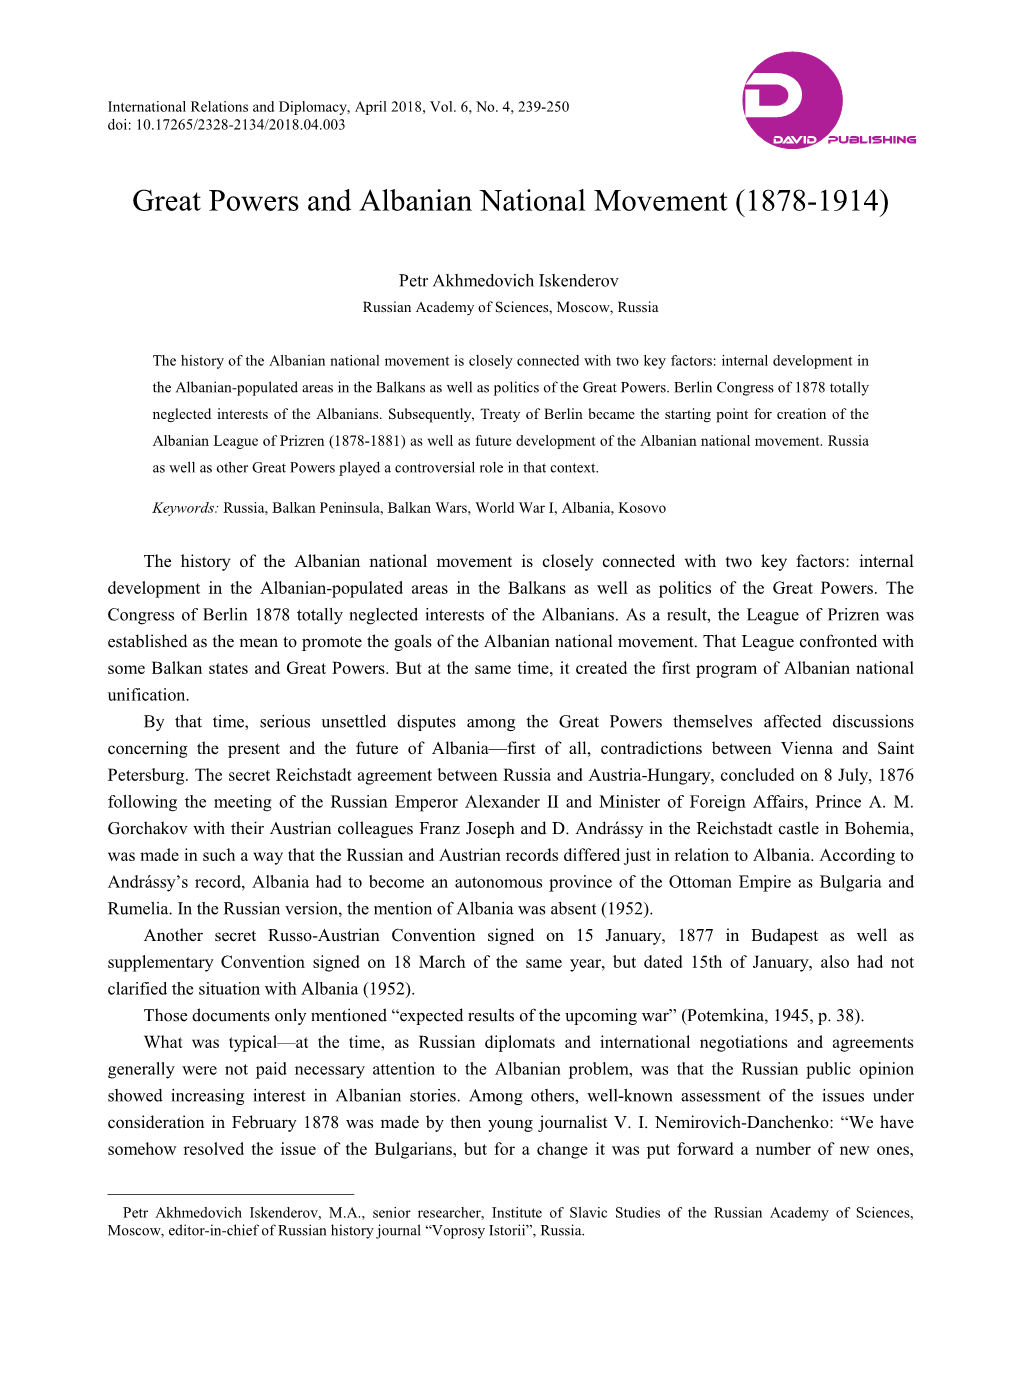 Great Powers and Albanian National Movement (1878-1914)